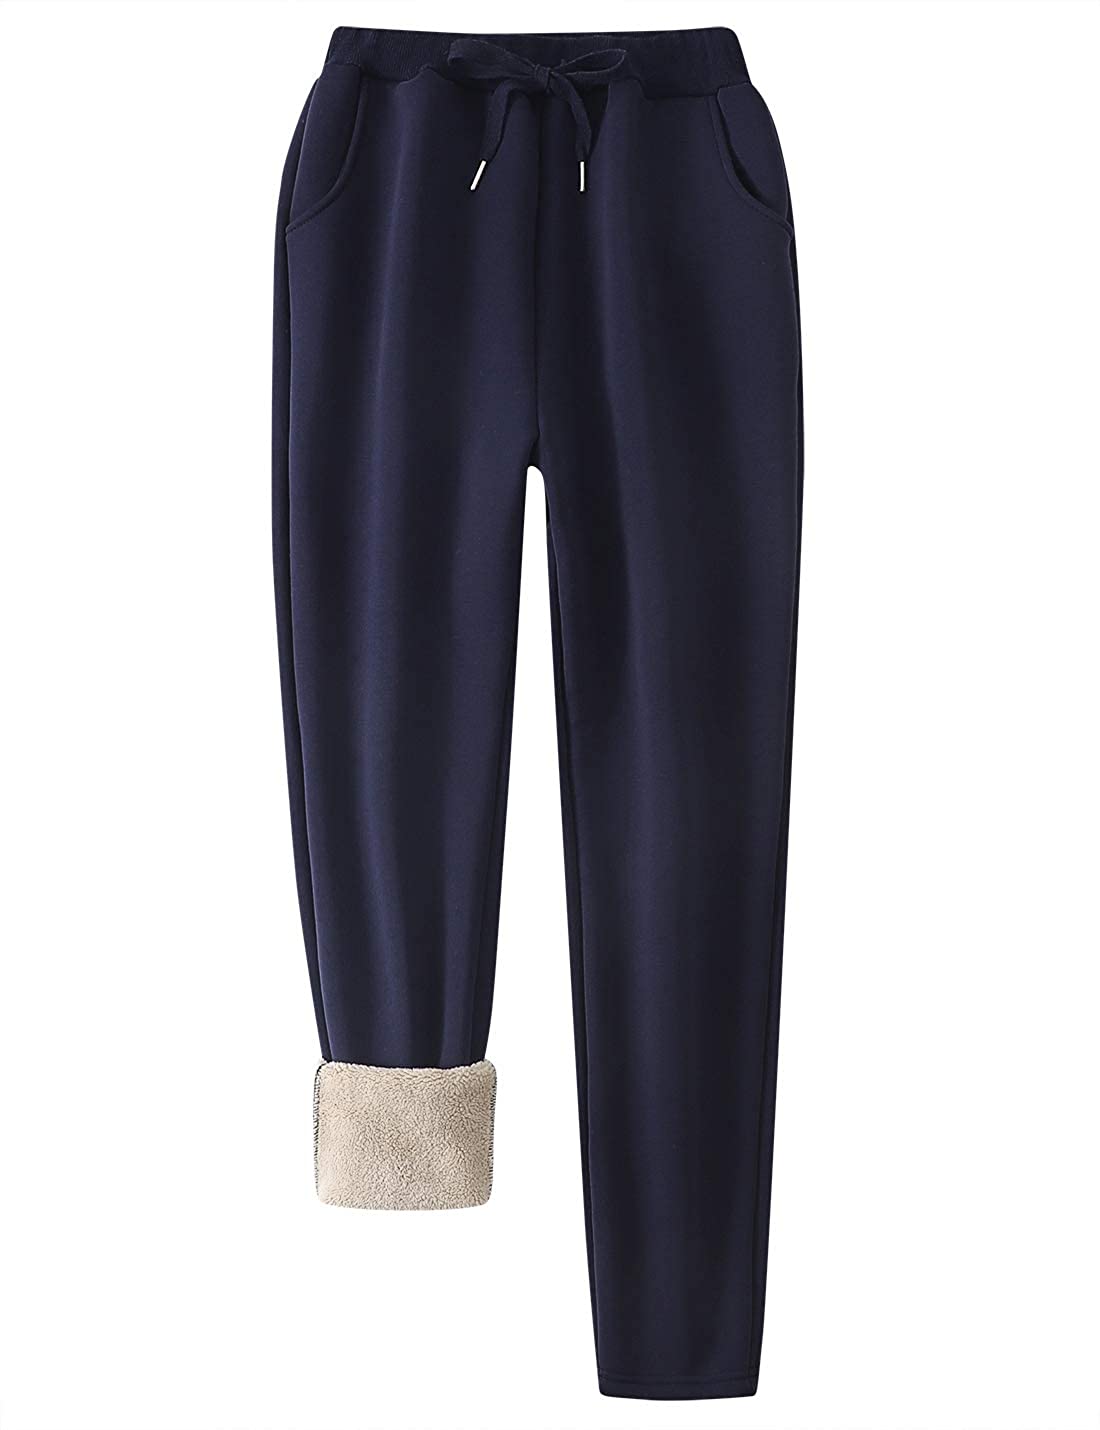  Flygo Womens Sherpa Lined Athletic Sweatpants